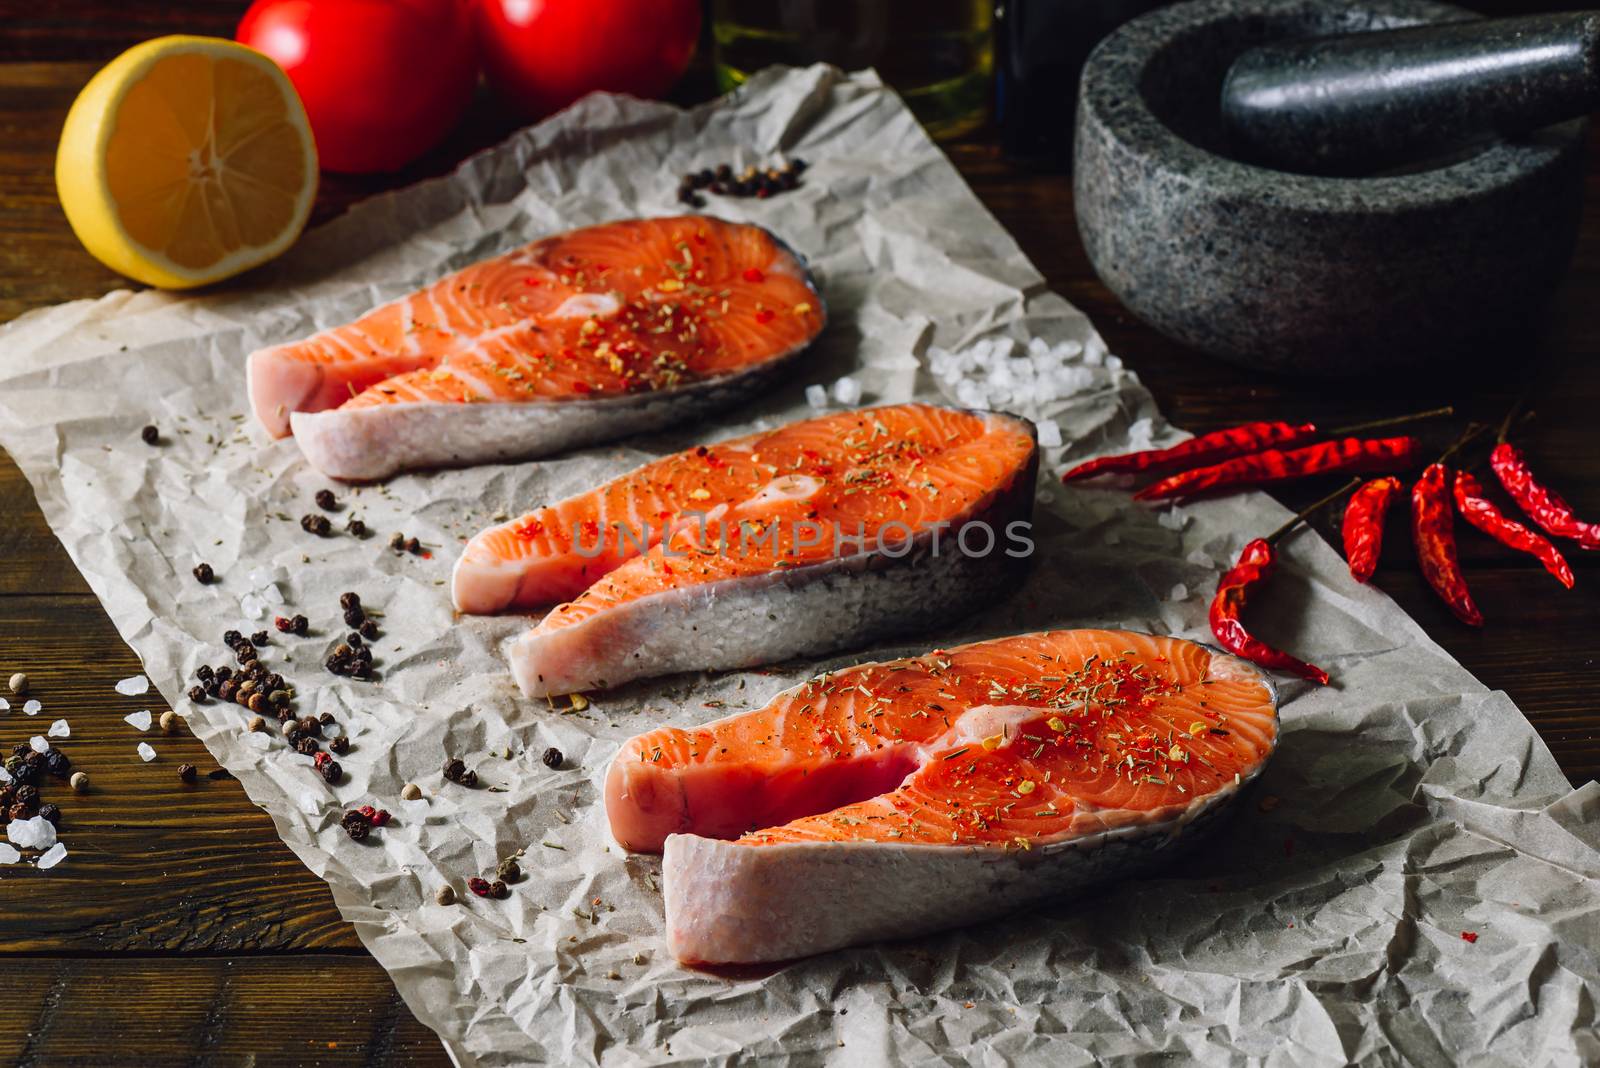 Three Salmon Steaks Prepared for Cooking with Chili Peppers and Other Spices.